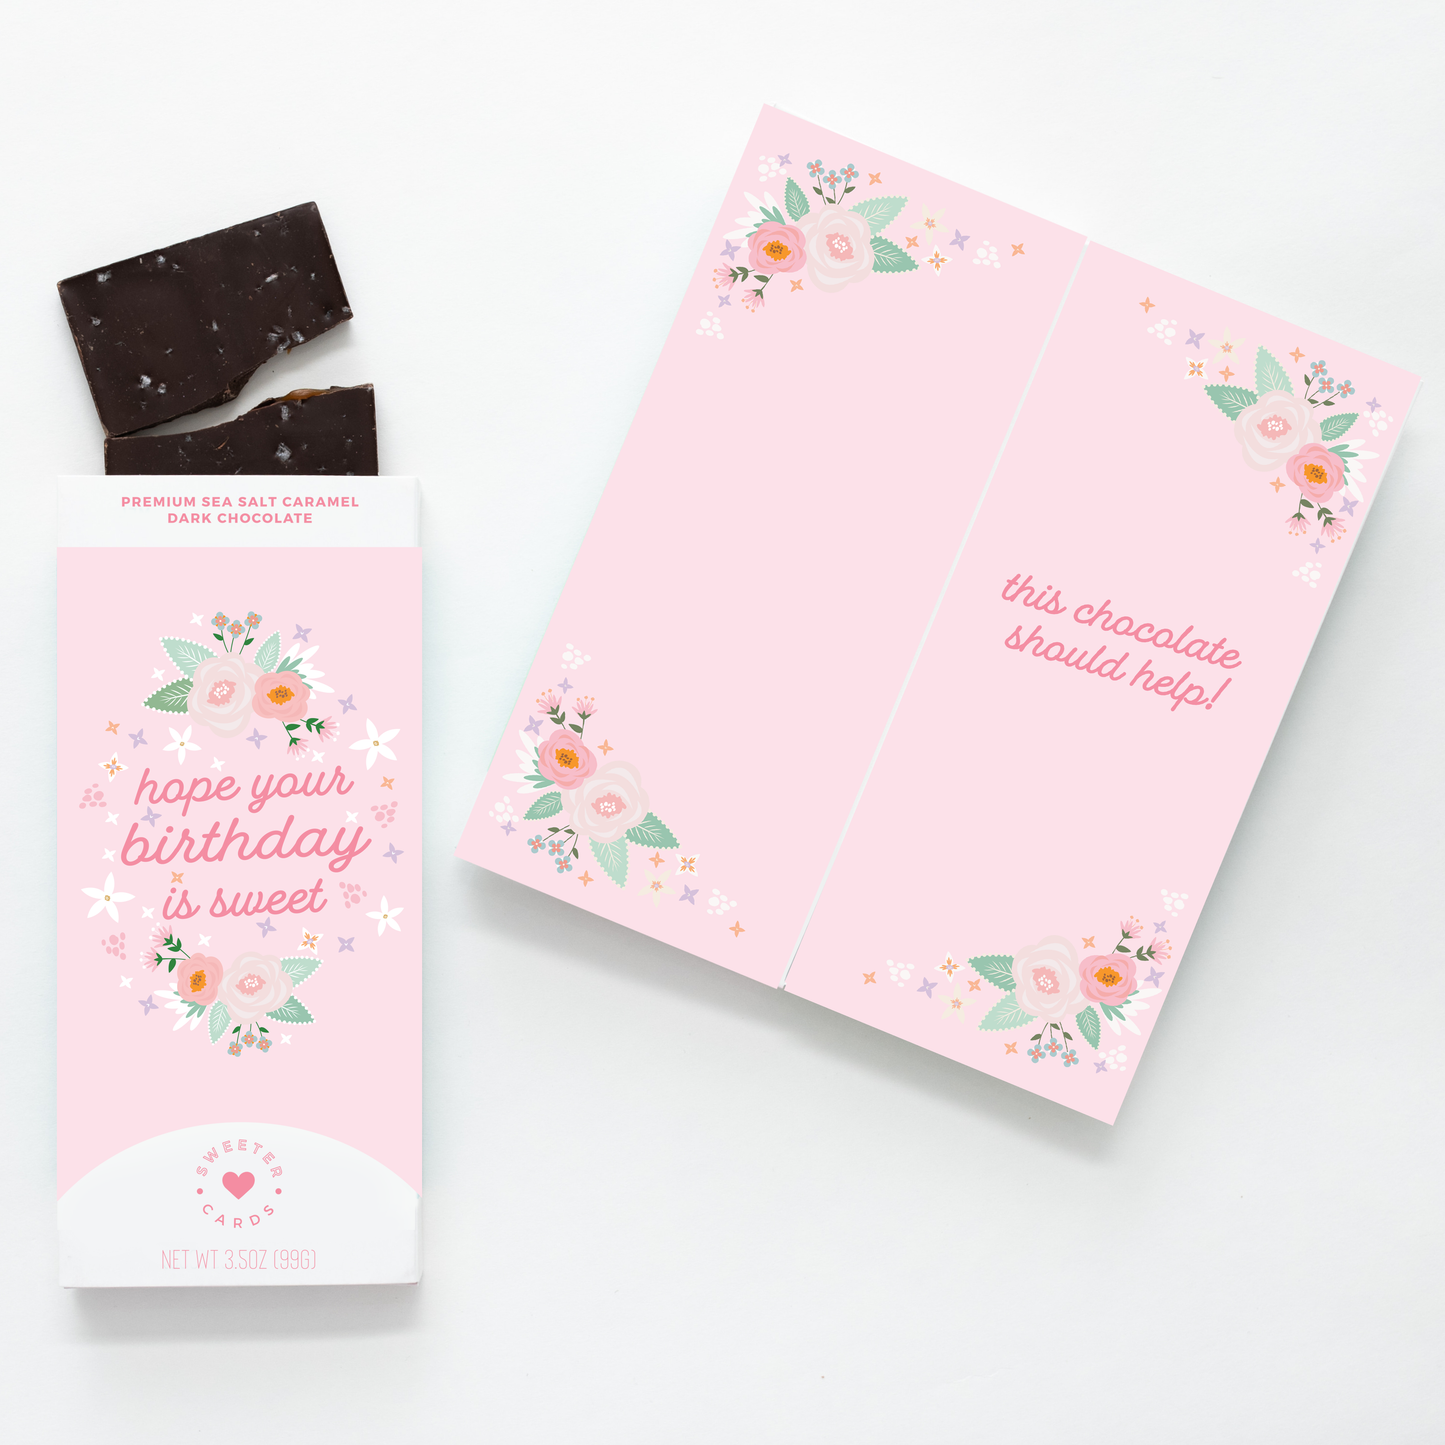 Hope your Birthday is Sweet–chocolate bar and greeting card!